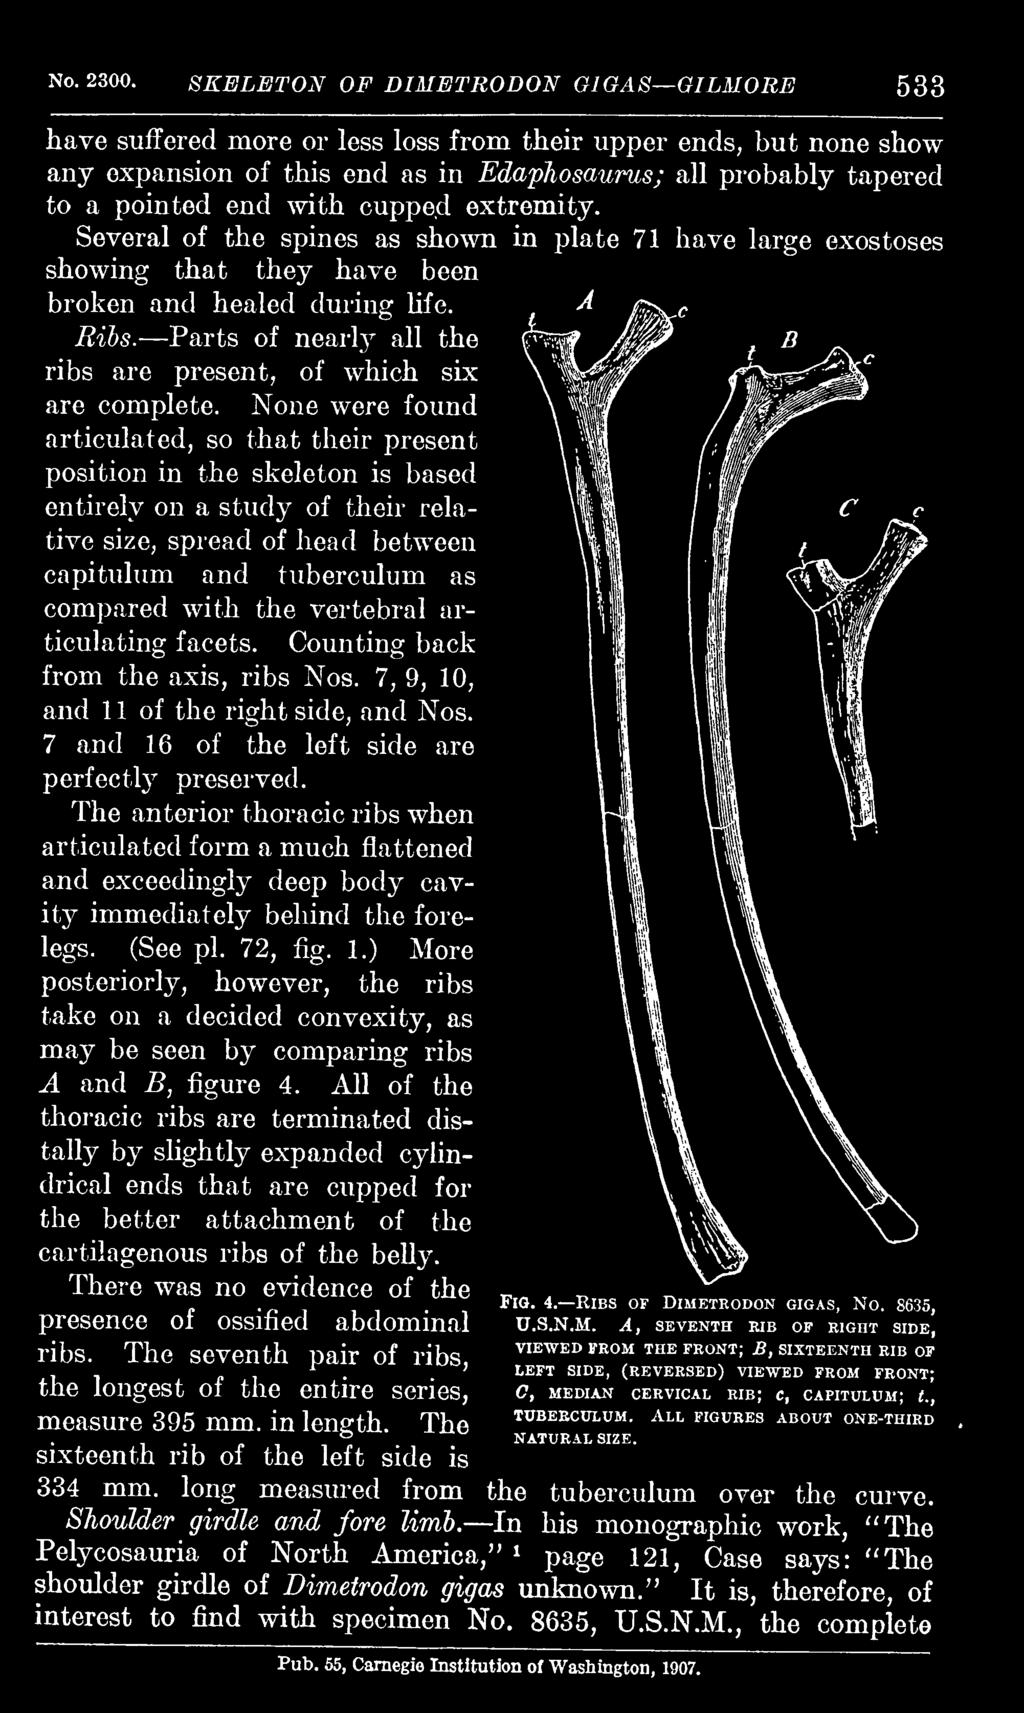 None were found articulated, so that their present position in the skeleton is based entirely on a study of their relative size, spread of head between capitulum and tuberculum as compared with the